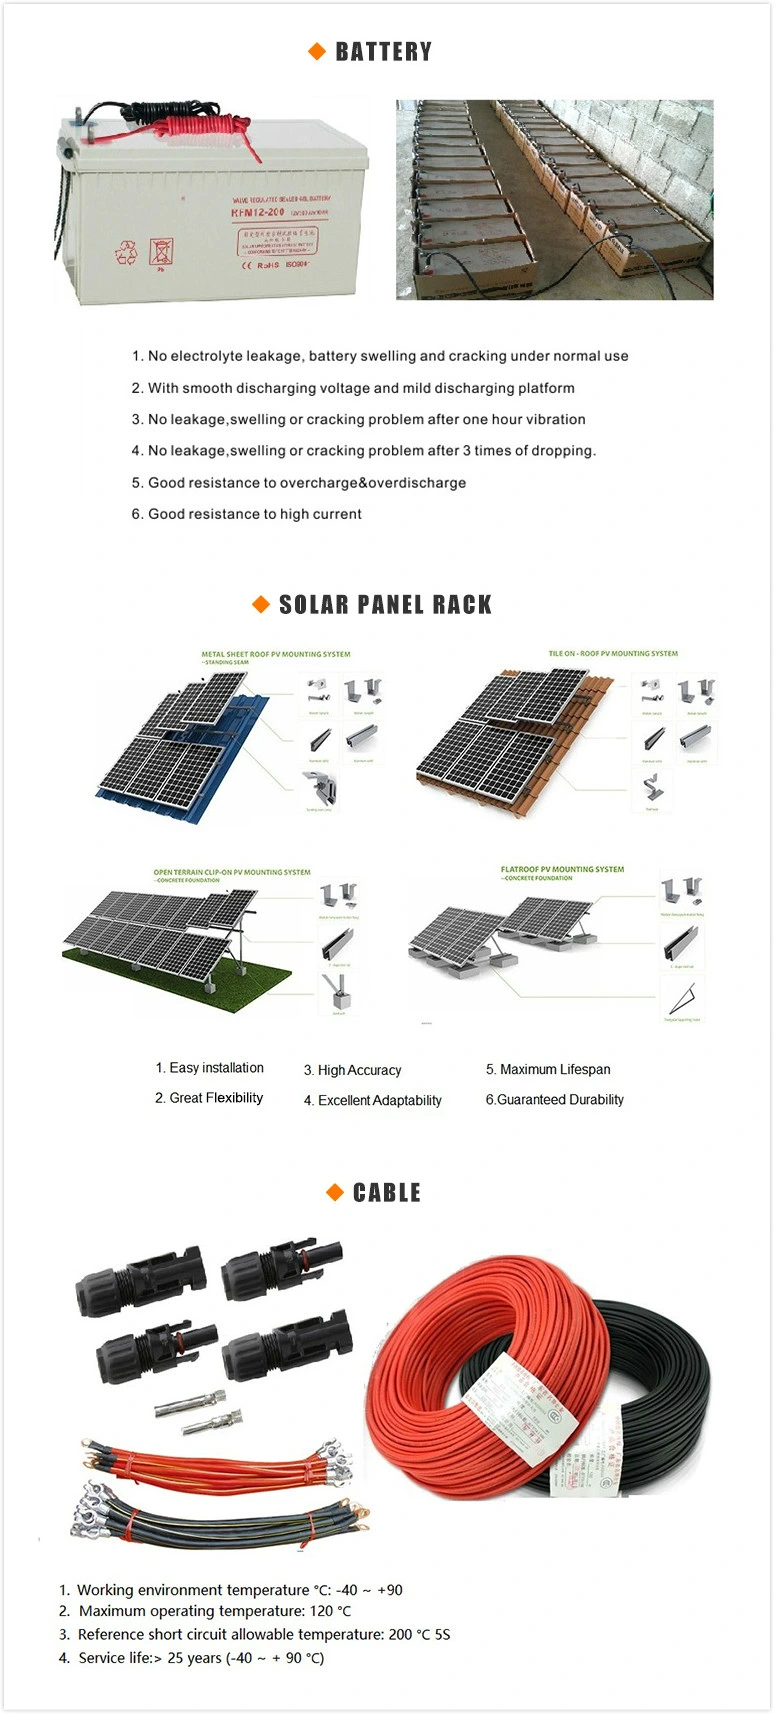 5kw Solar Home Power System for Household Equipments (TV sets, lights, tubelights, fans and so on)